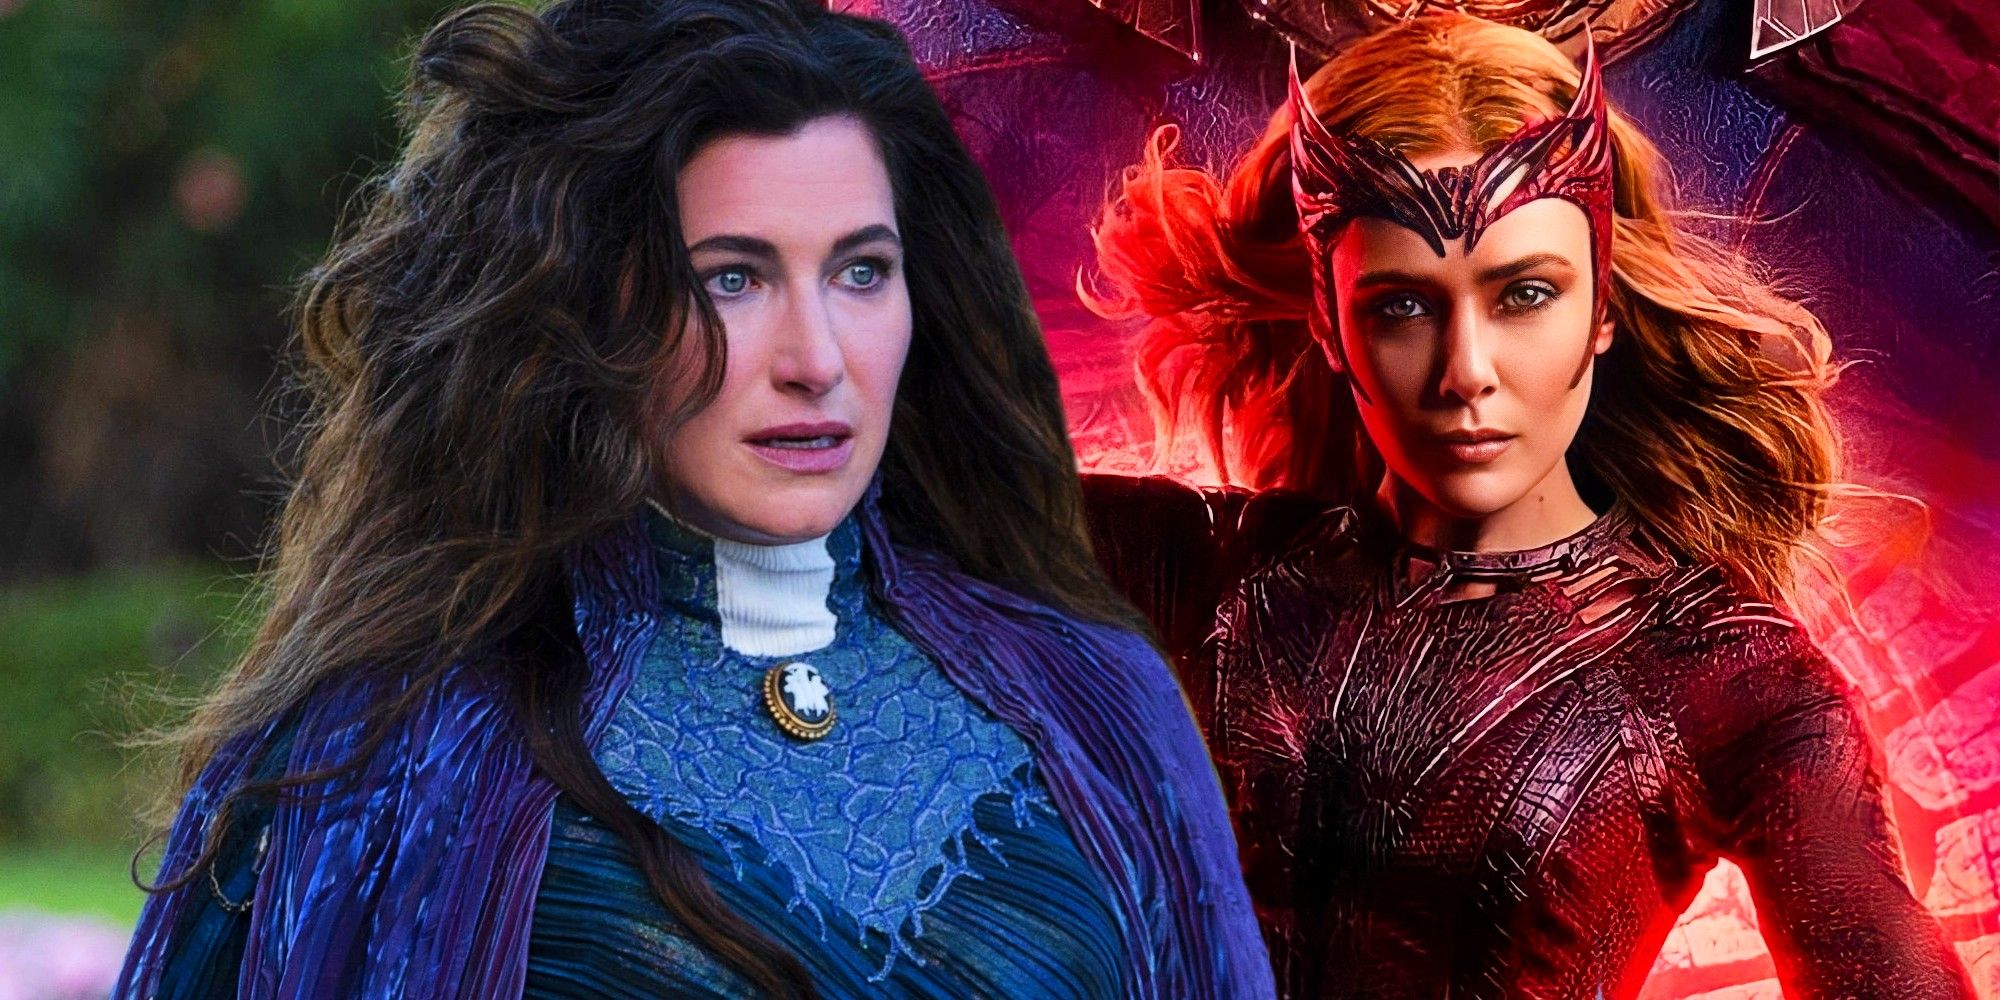 Kathryn Hahn as Agatha Harkness and Elizabeth Olsen as Scarlet Witch